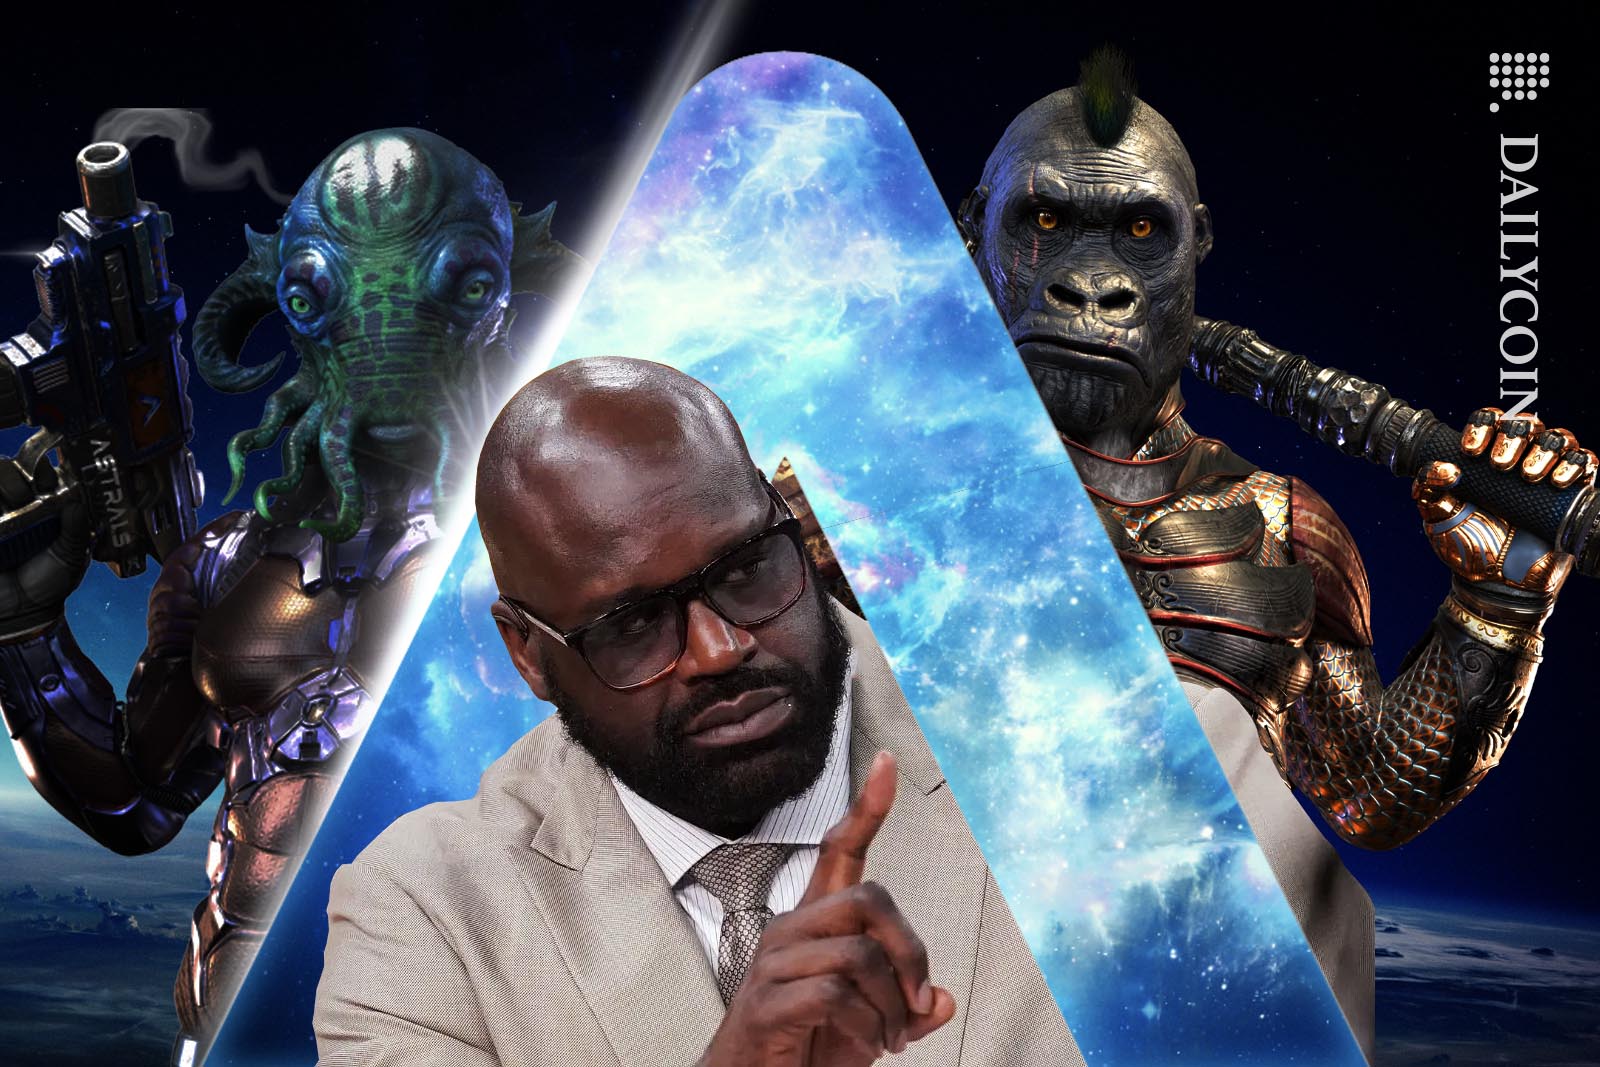 Shaquille O'neal looking upset whilst emerging from an Astrals Logo with NFT creatures behind him.